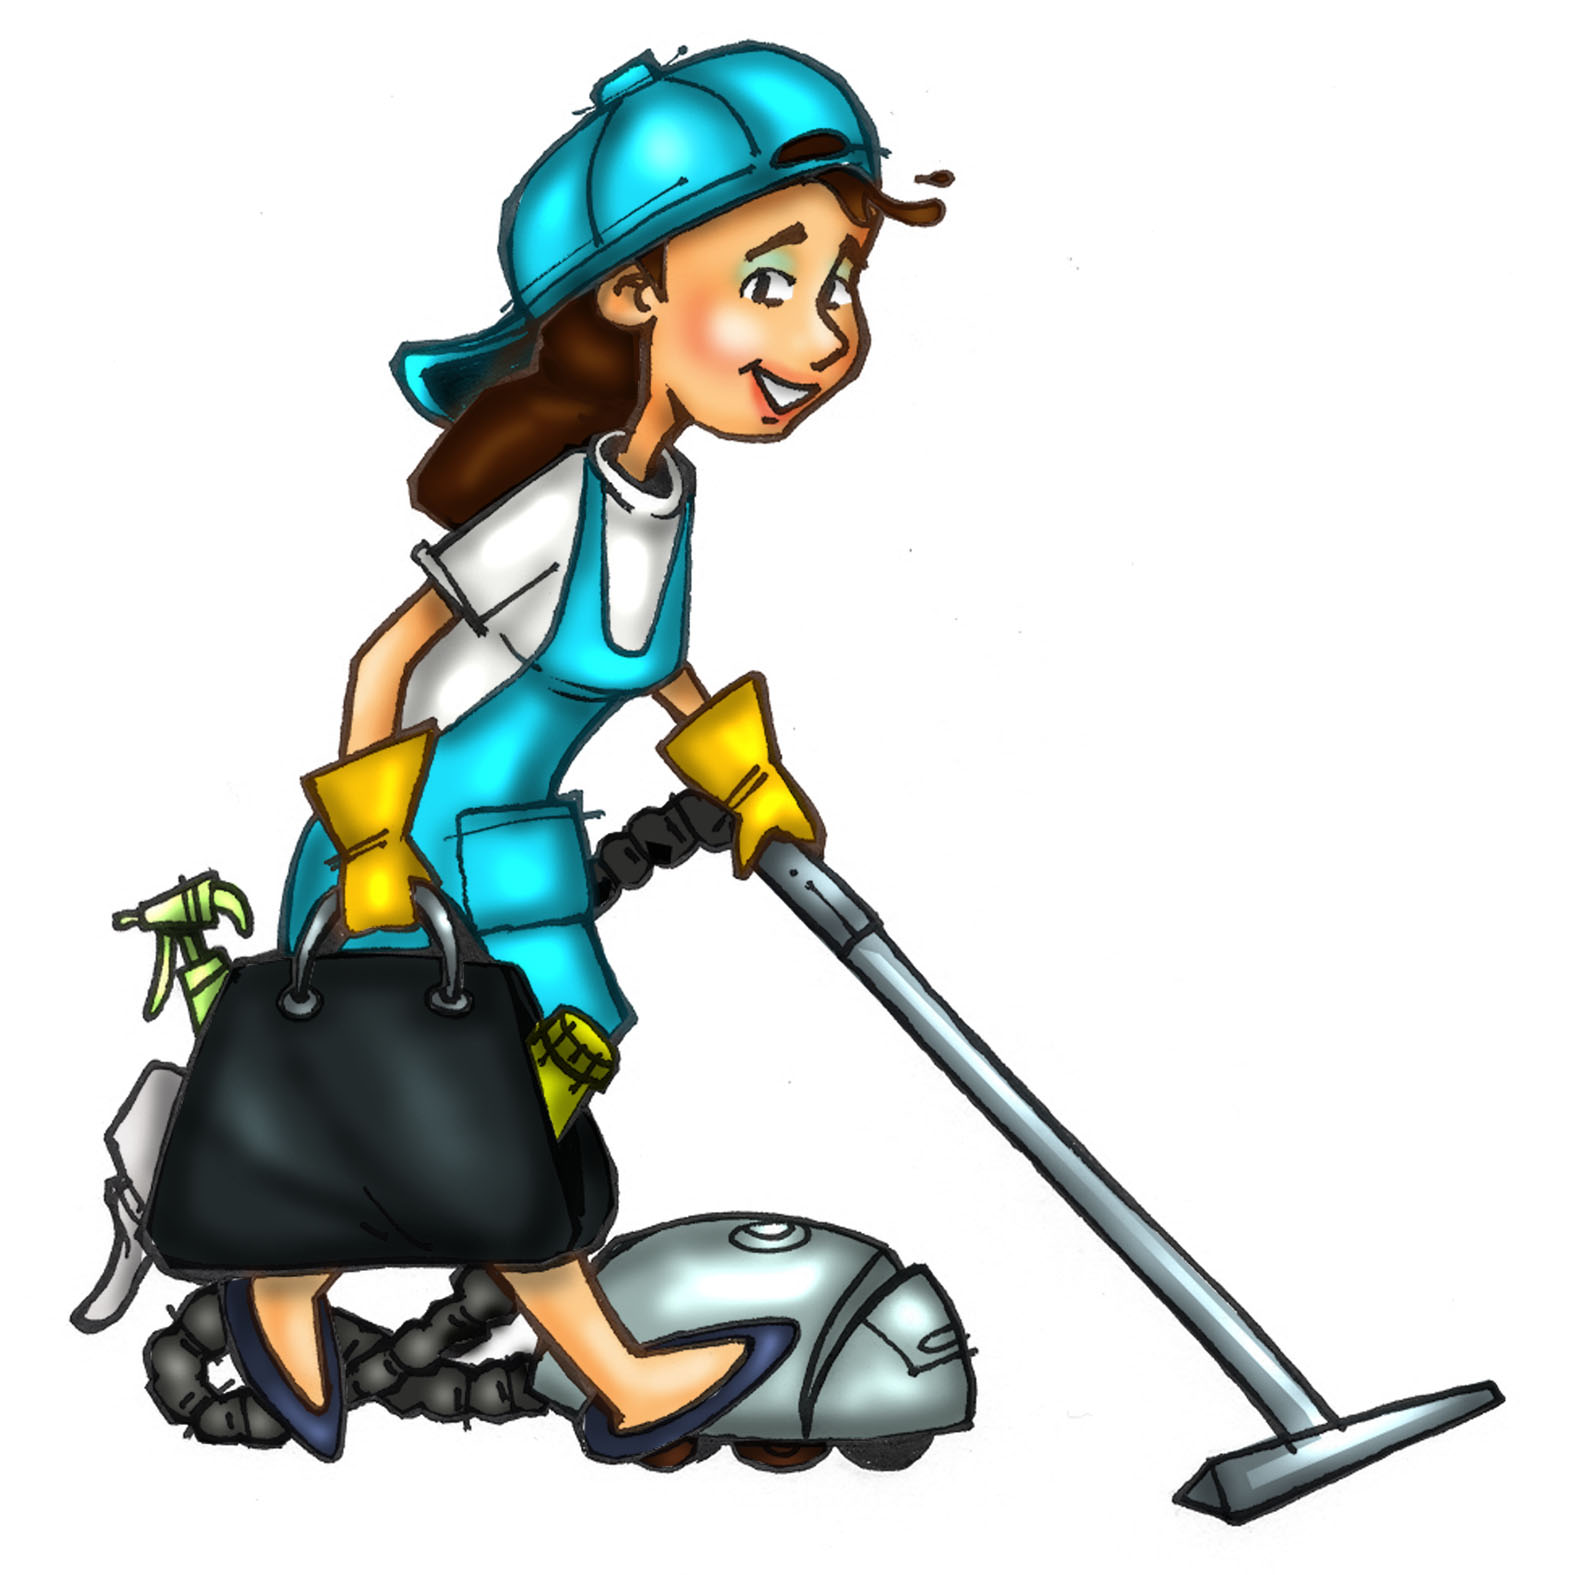 For Business Cleaning Services Clipart